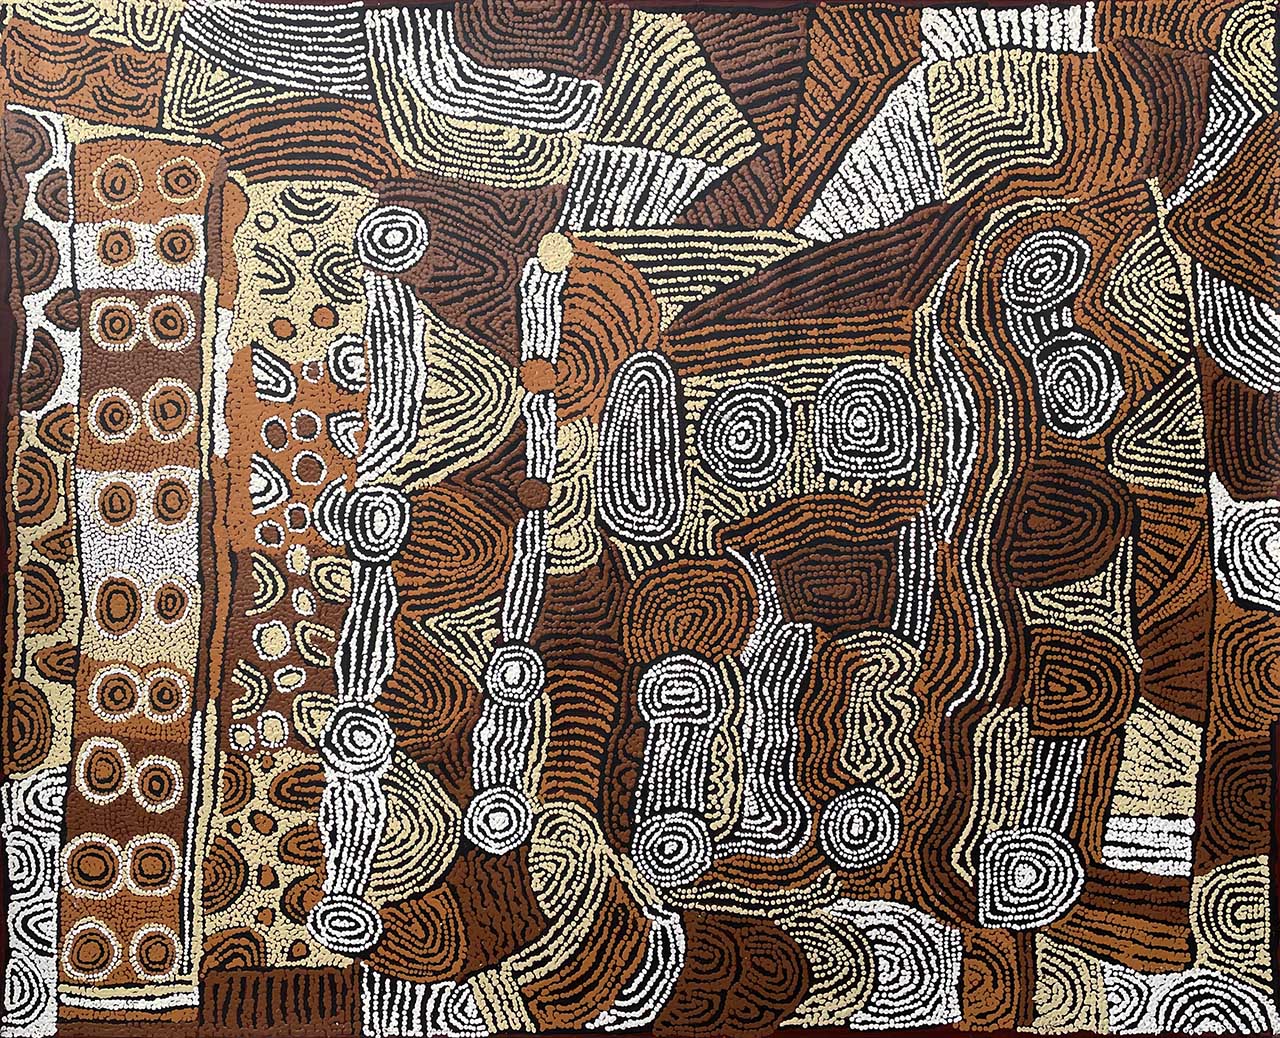 Colours of the Earth Online Exhibition - Japingka Aboriginal Art